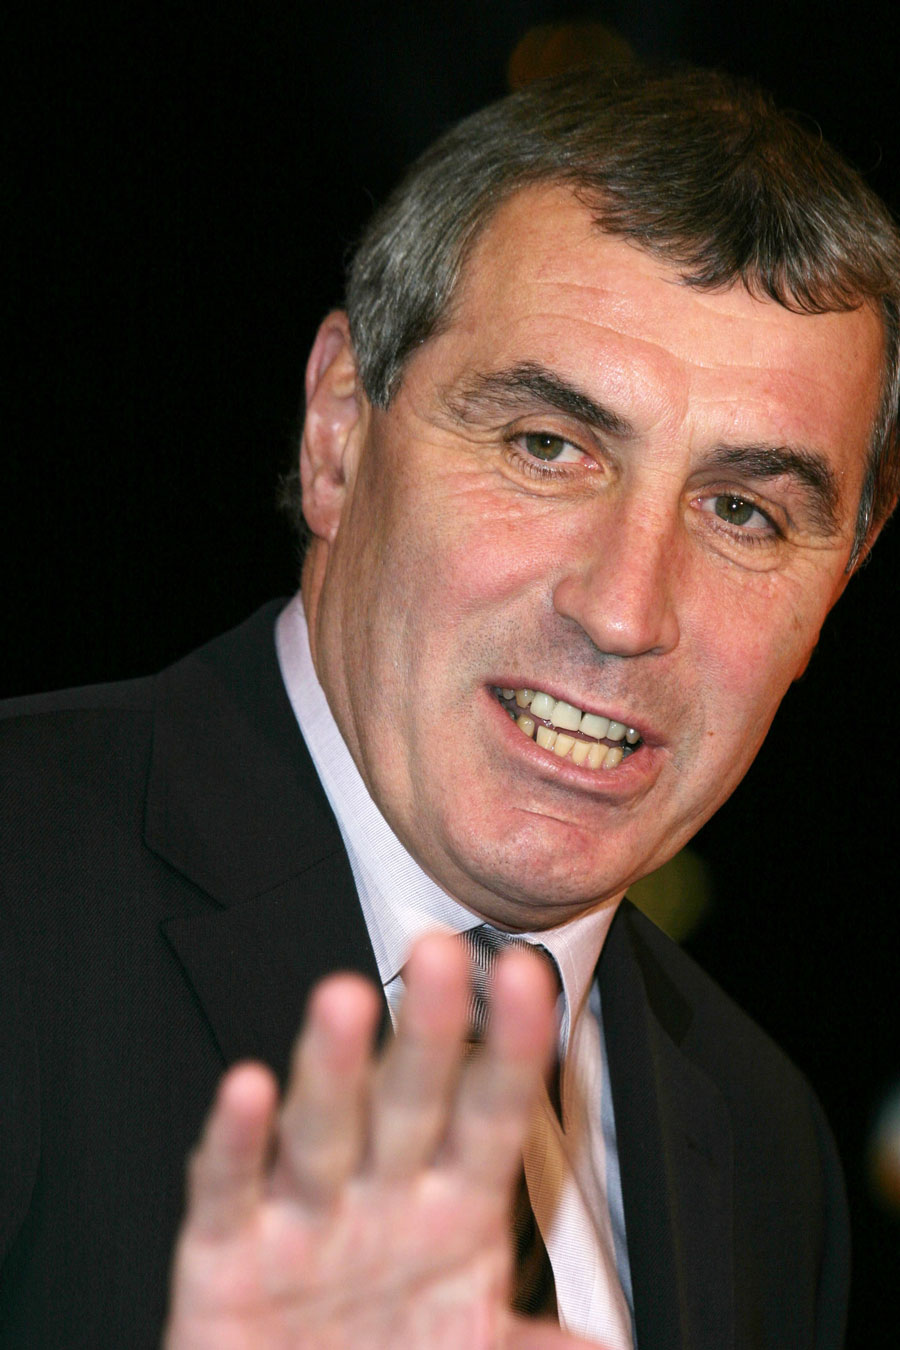 Peter Shilton speaking to an audience